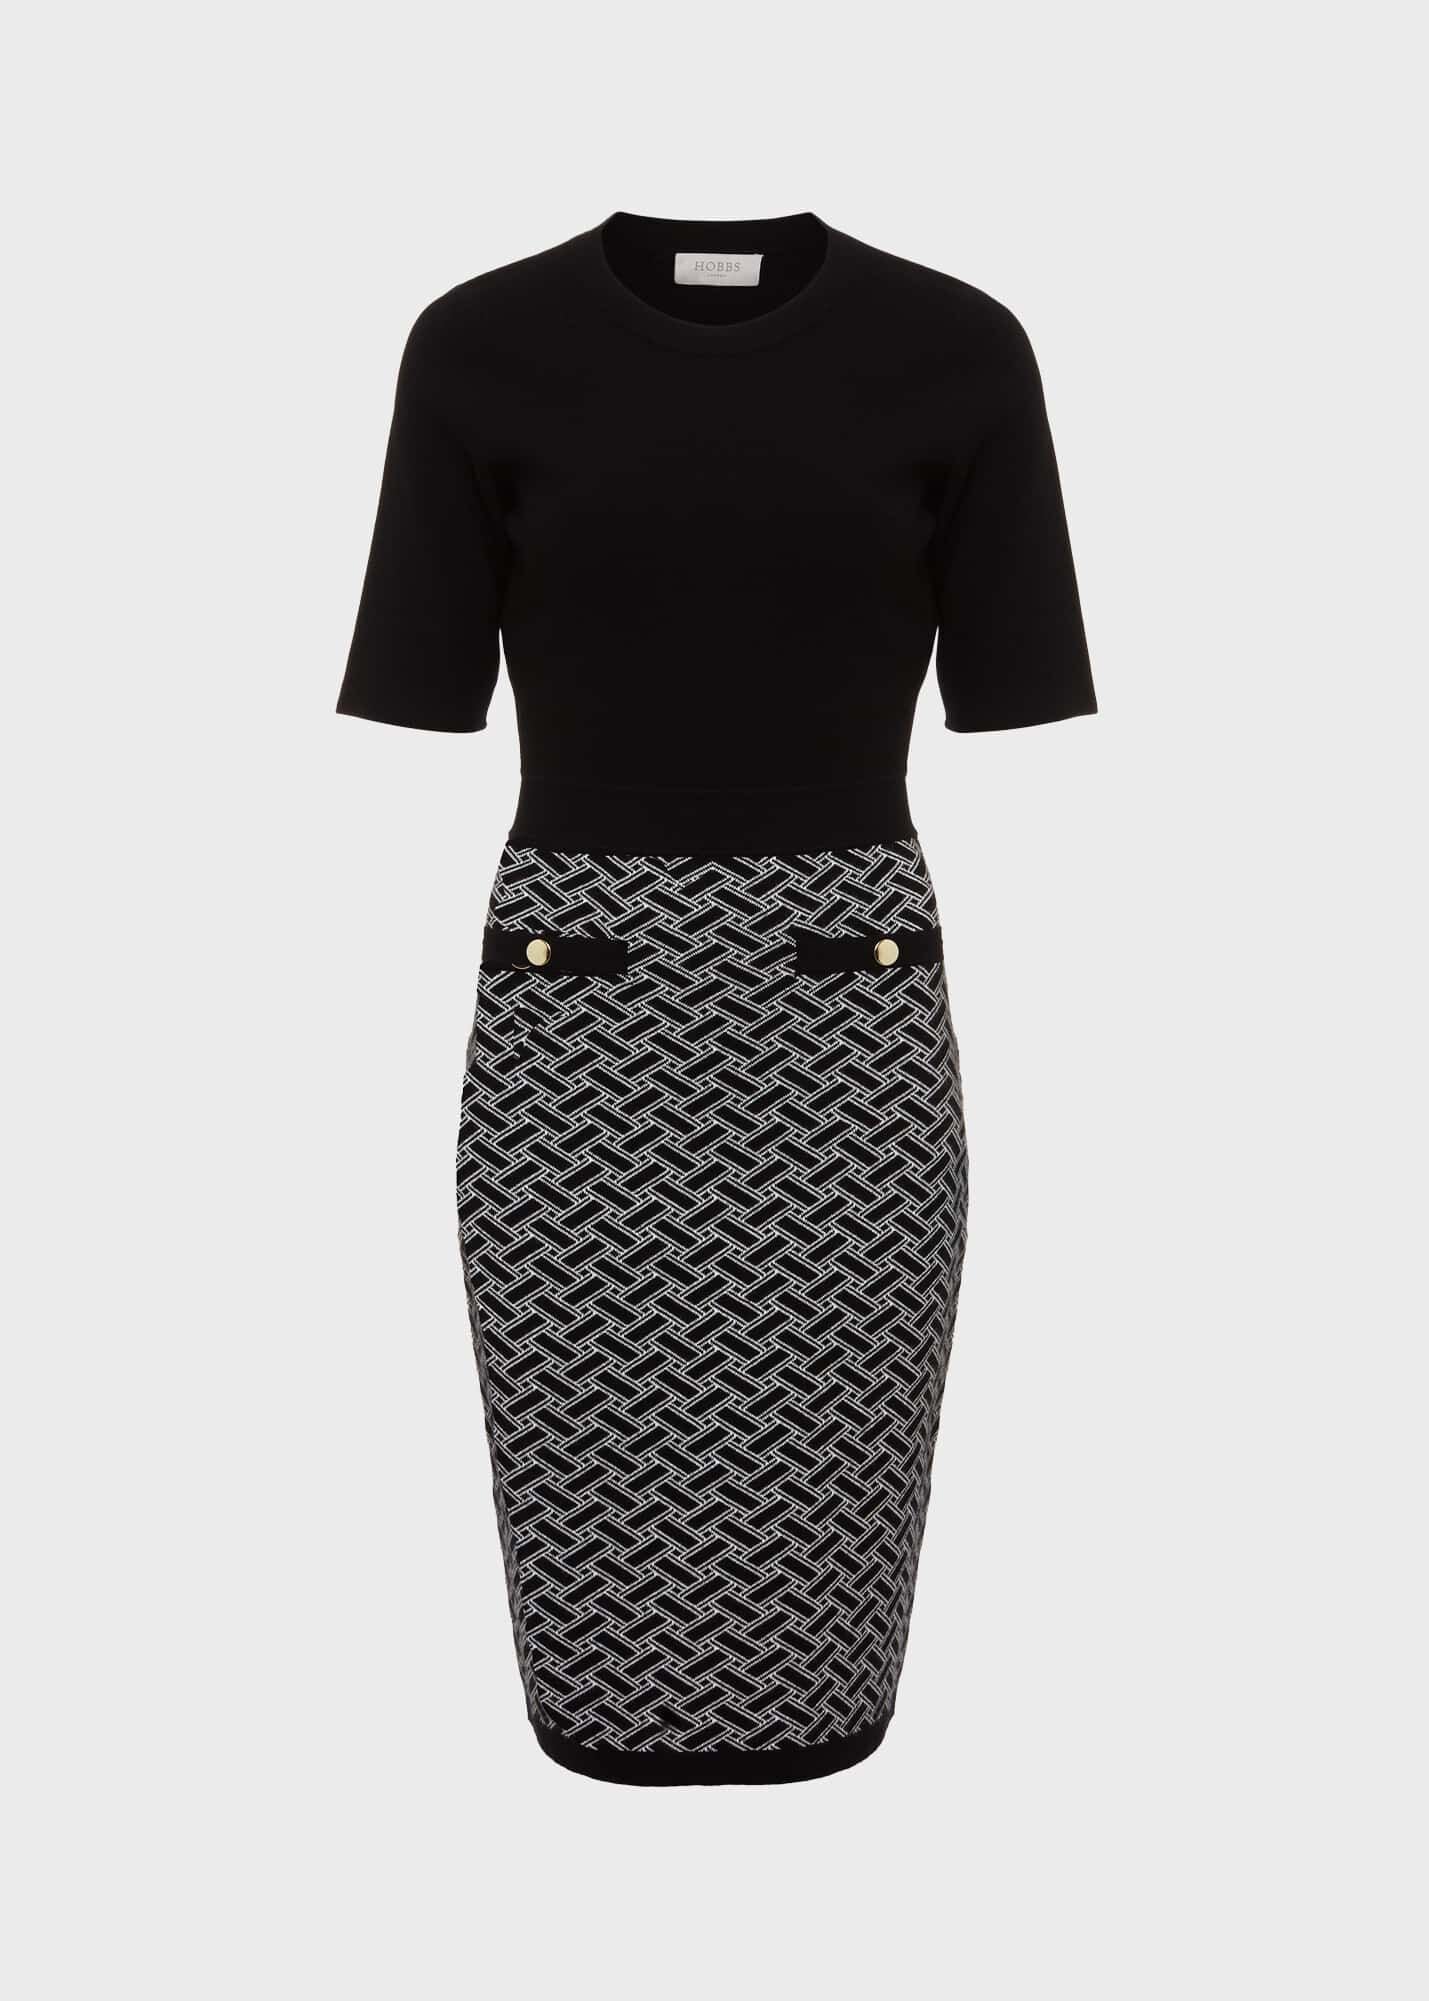 Perrie Knitted Dress 0223/9068/1085l00 Black-Ivory